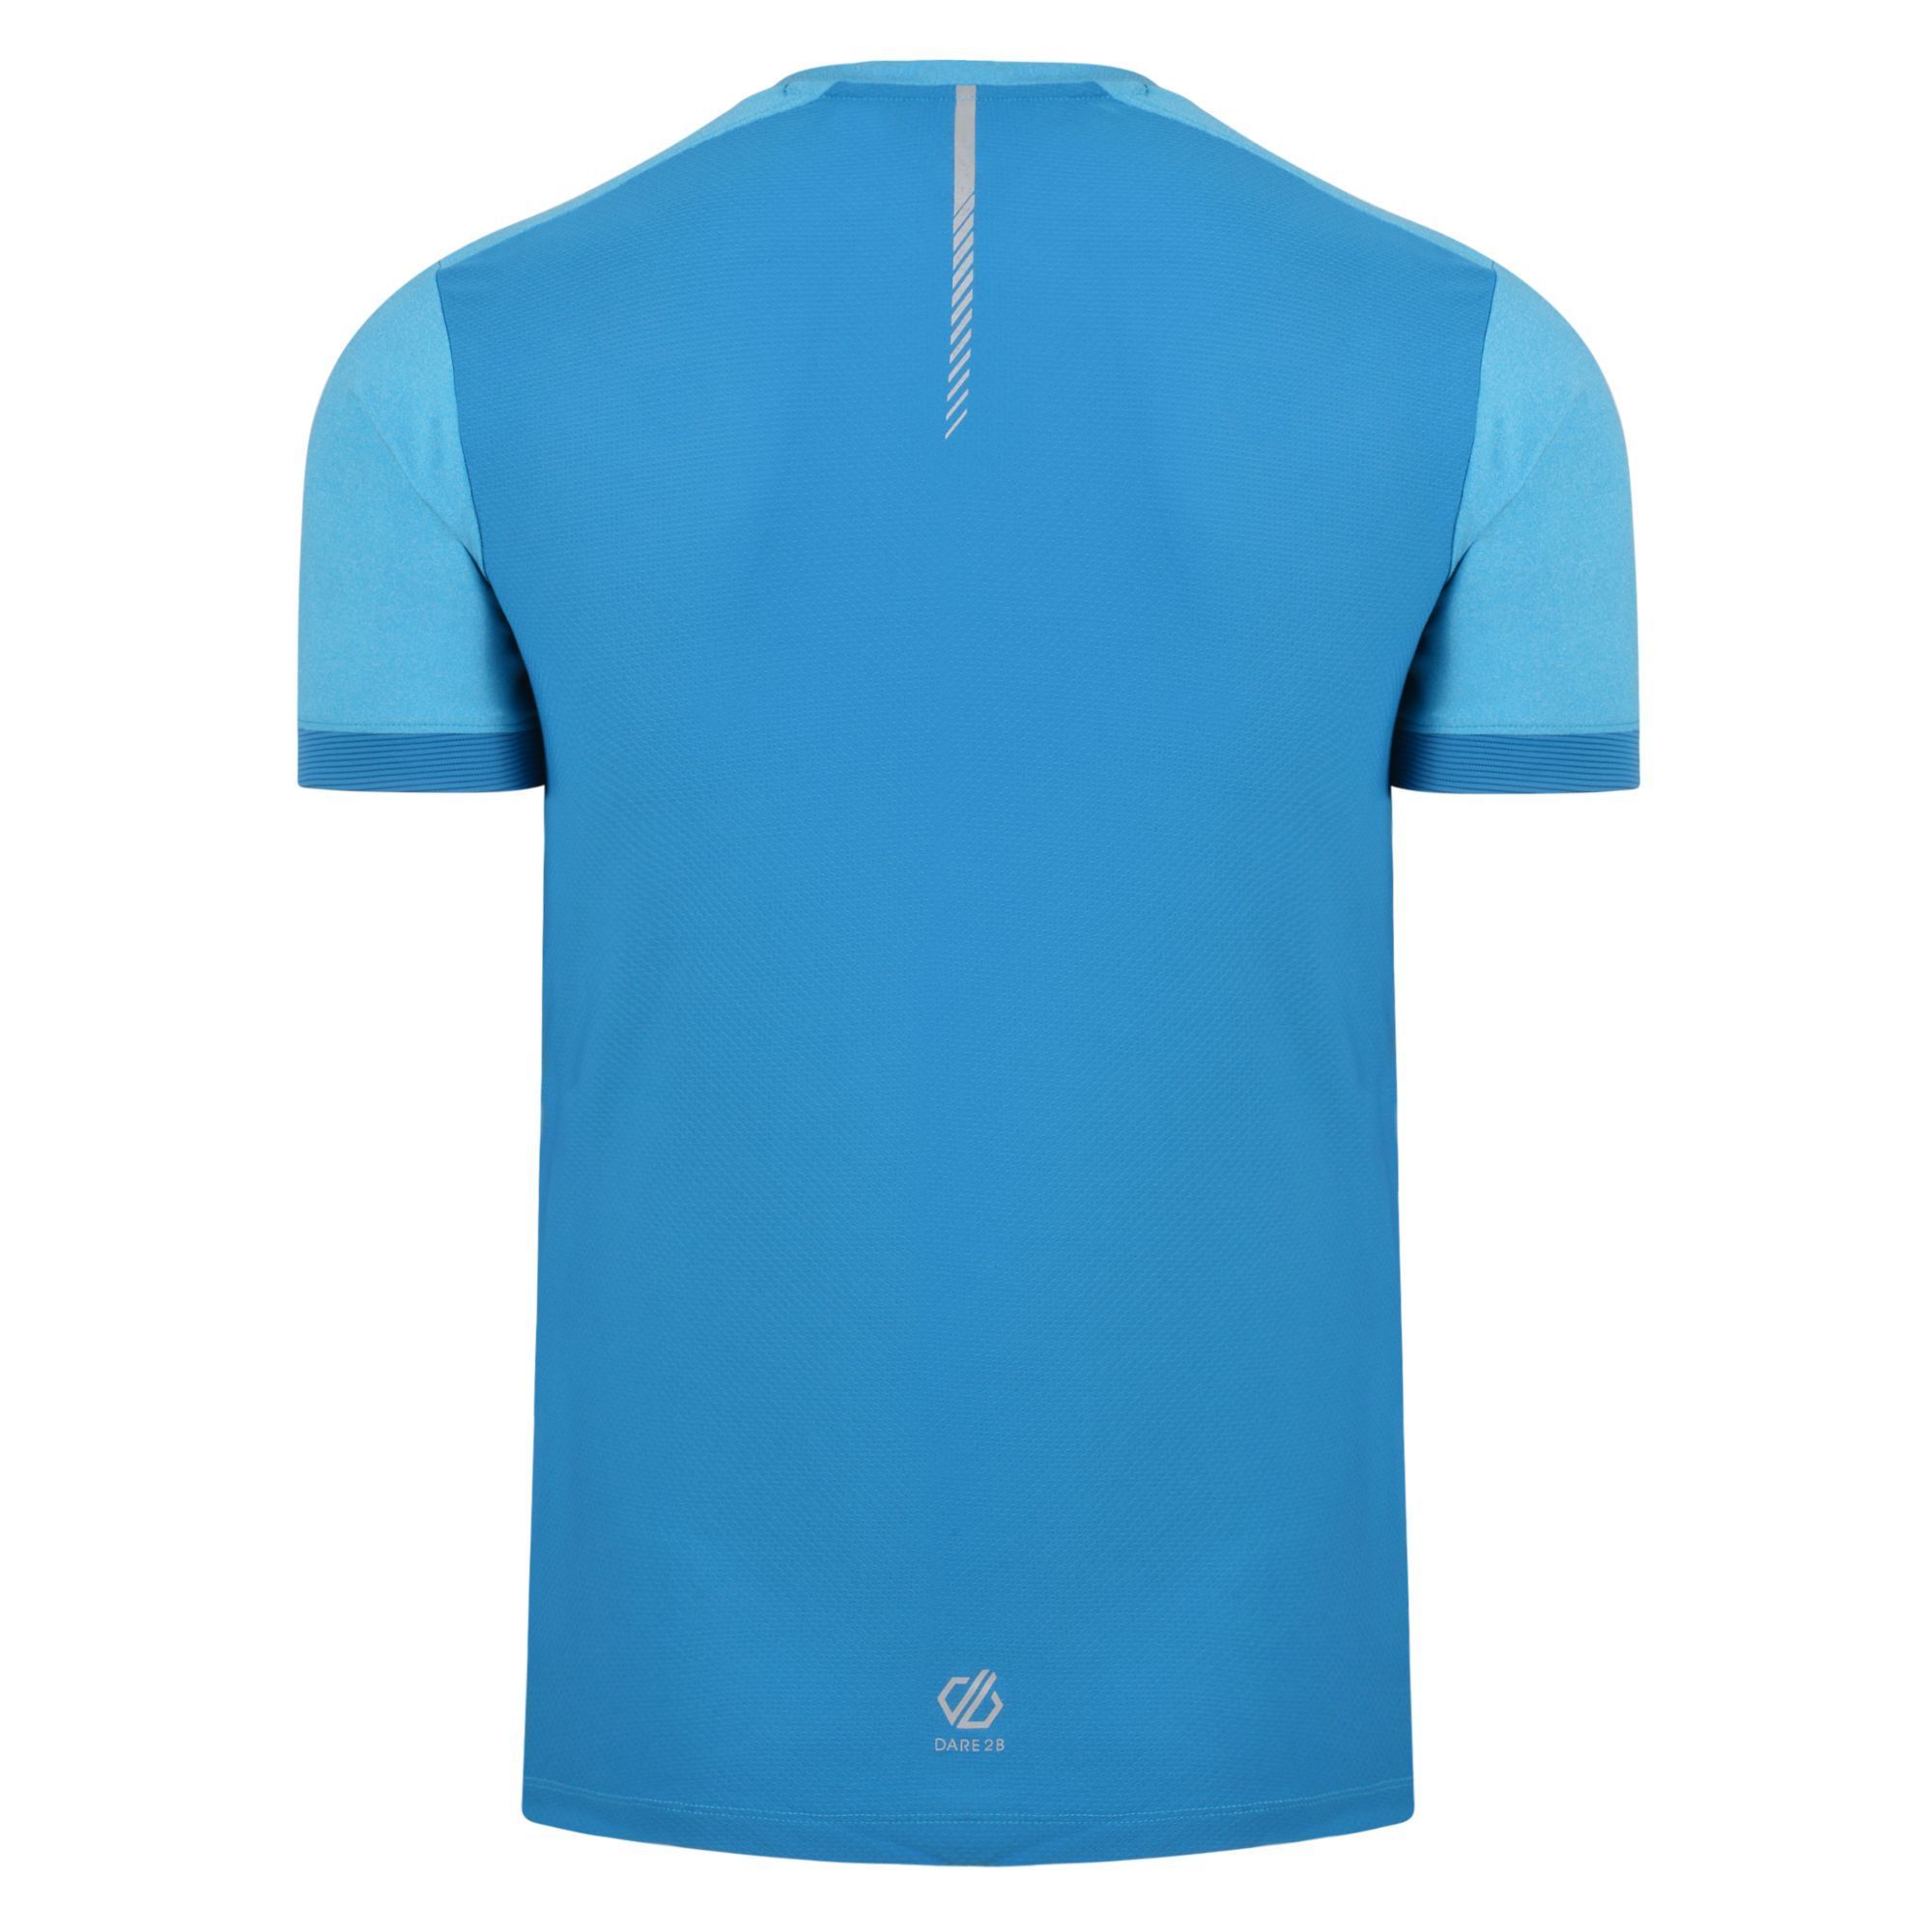 100% polyester.  odour control treatment. Good wicking performance. Quick drying. Full mesh back ventilation. Reflective detail for enhanced visibility. Round neck.